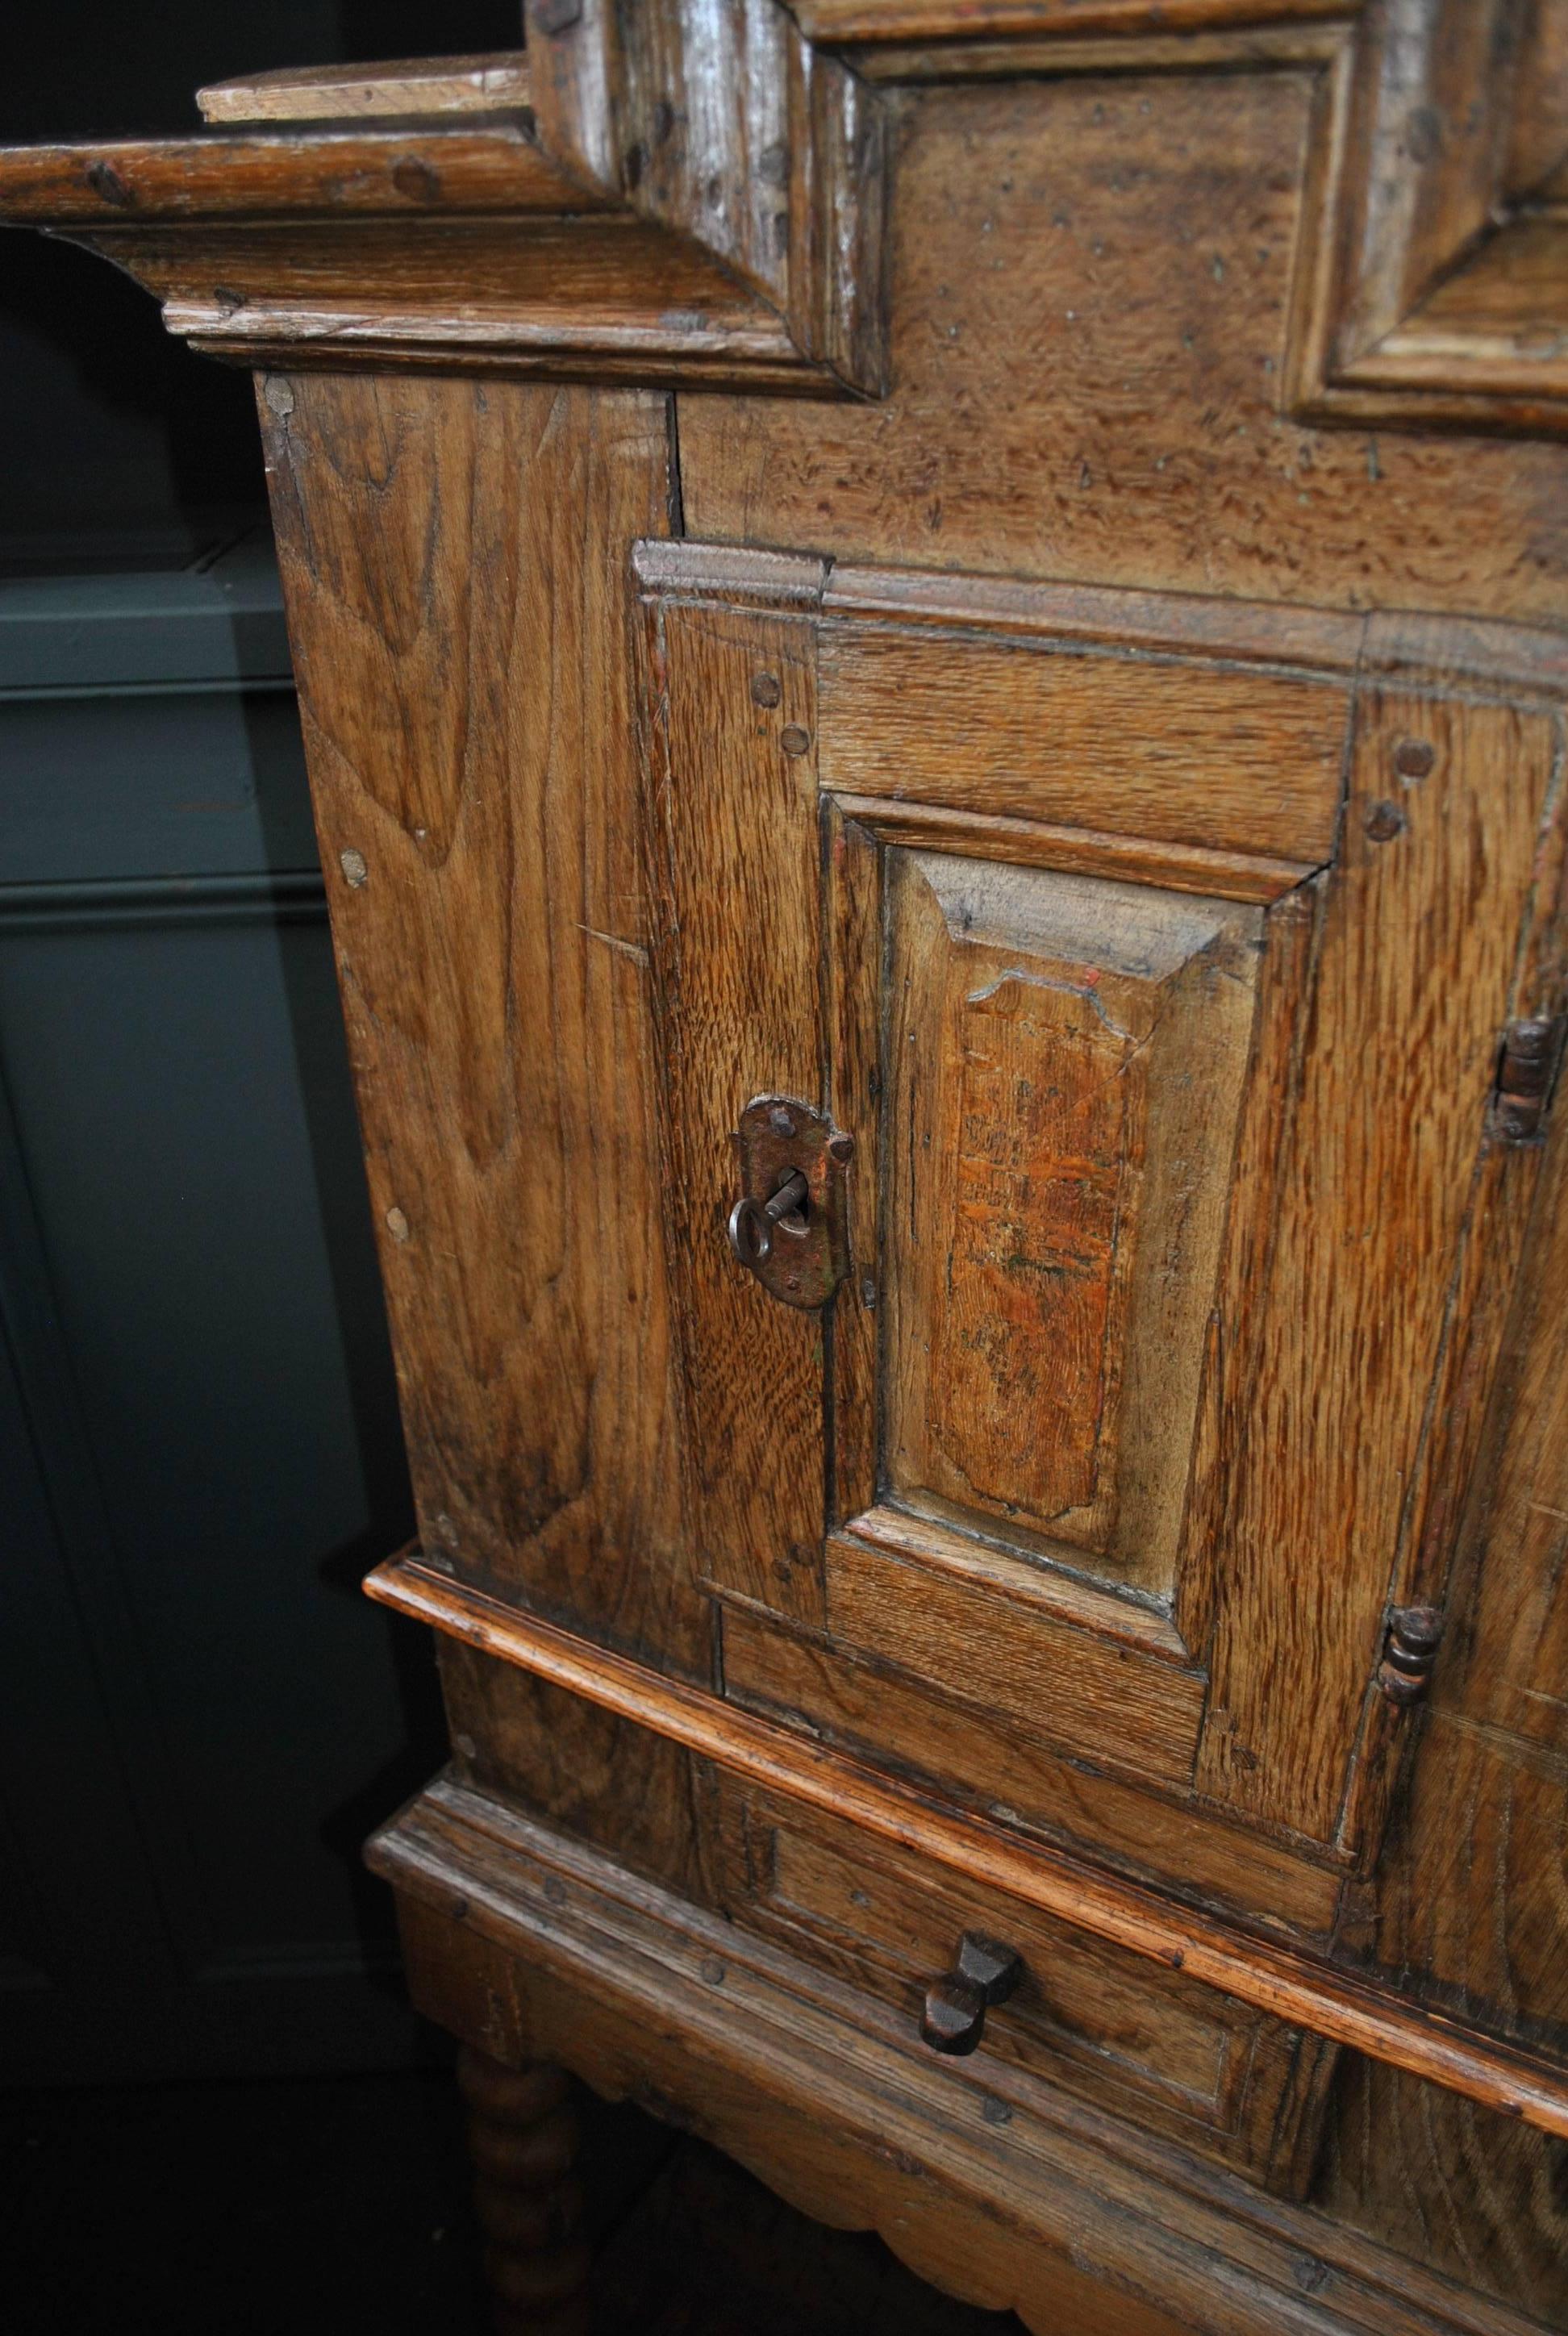 A charming rustic handcrafted antique Gustavian cabinet. Made from solid European oak this piece is absolutely full of naive country character. Dating from the late 18th century, Scandinavia. Wonderful hand forged metal fittings - hinges, escutcheon